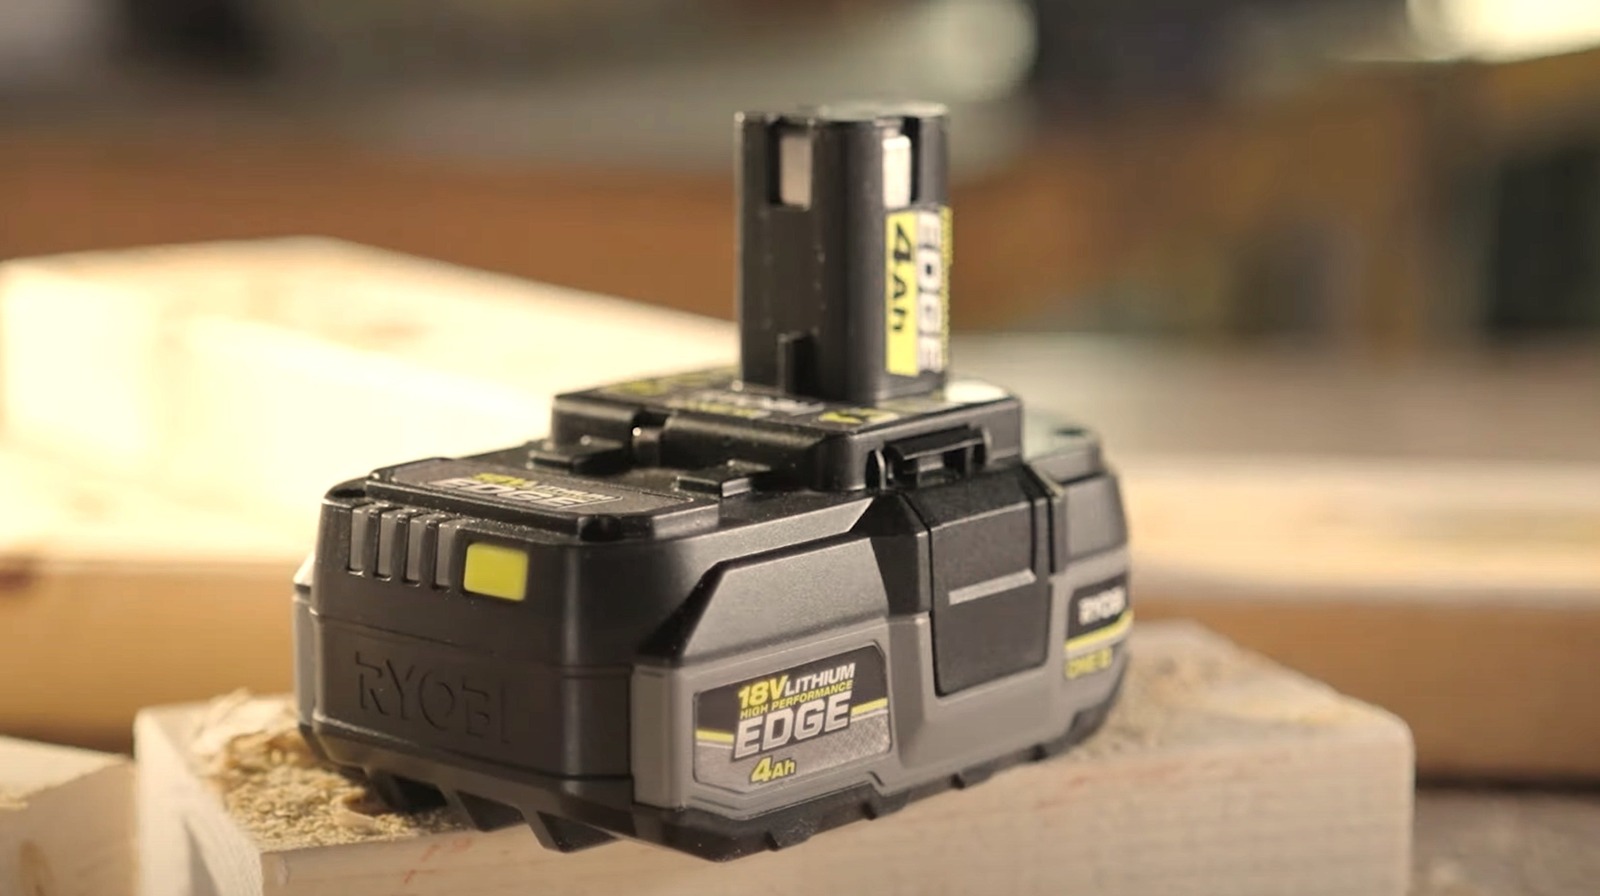 Complete Guide to Ryobi’s EDGE Technology